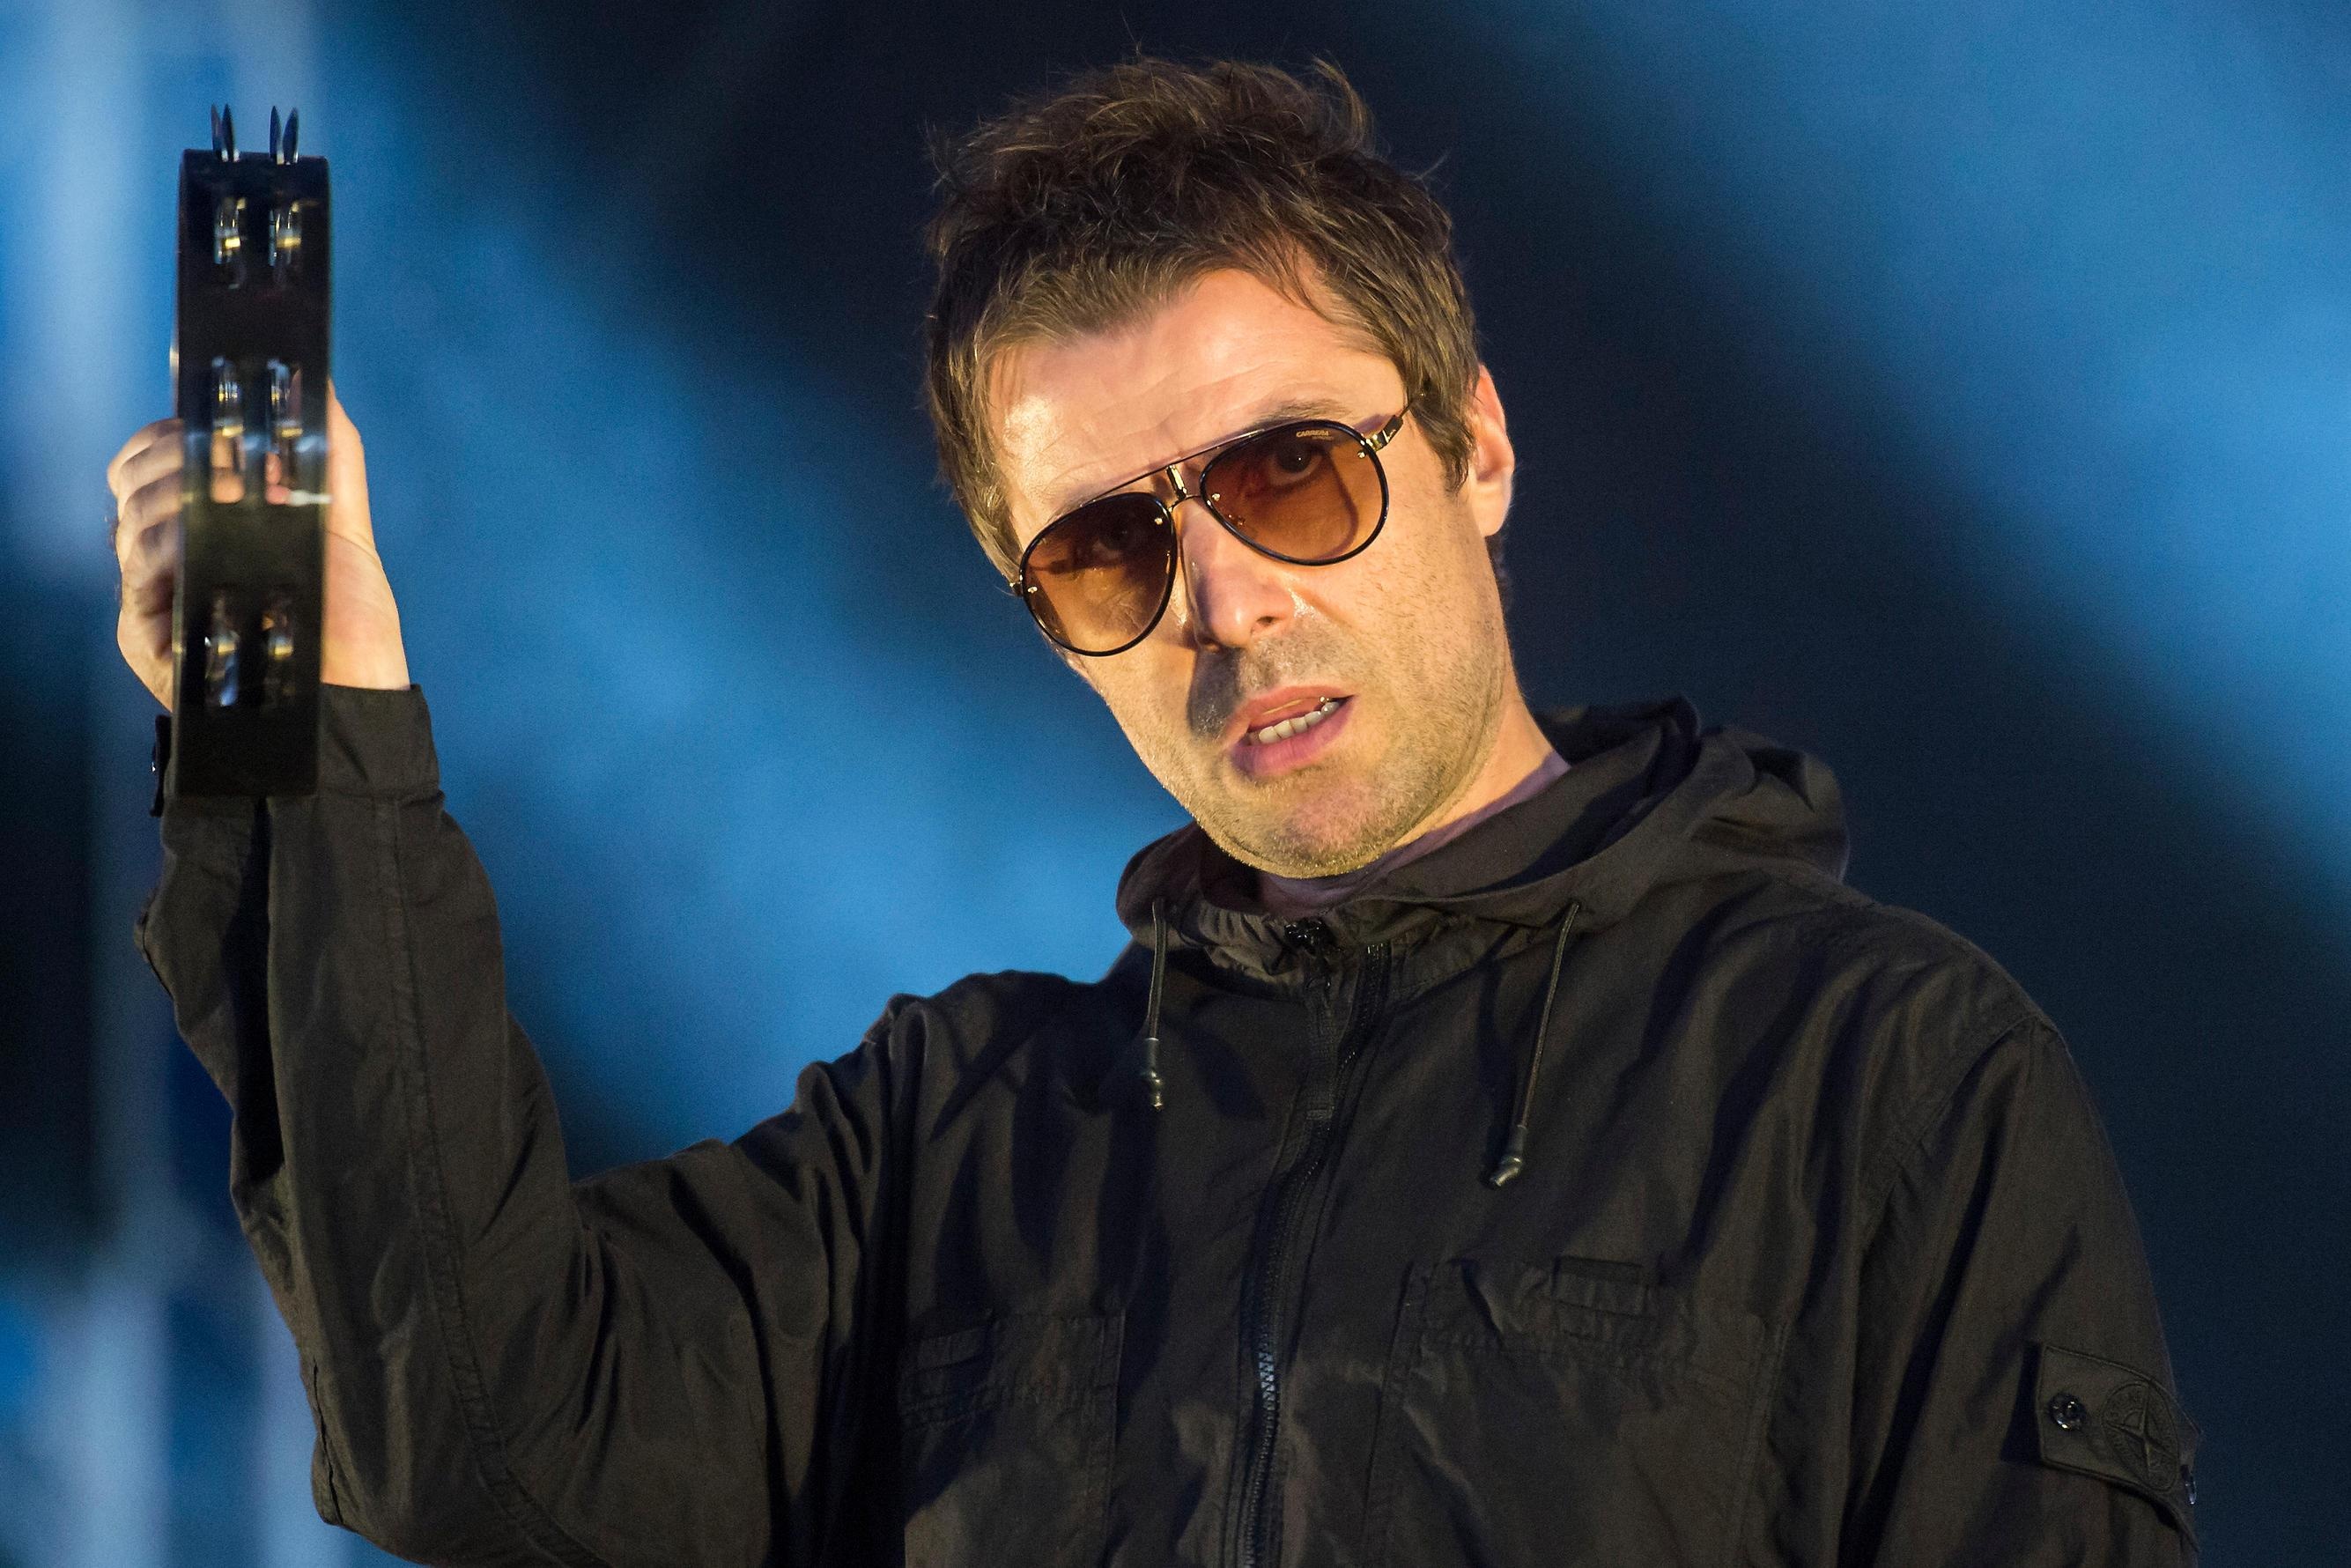 Liam Gallagher's surprise mix of new music and Oasis hits had the crowd going absolutely nuts at Latitude | The Sun 2670x1780